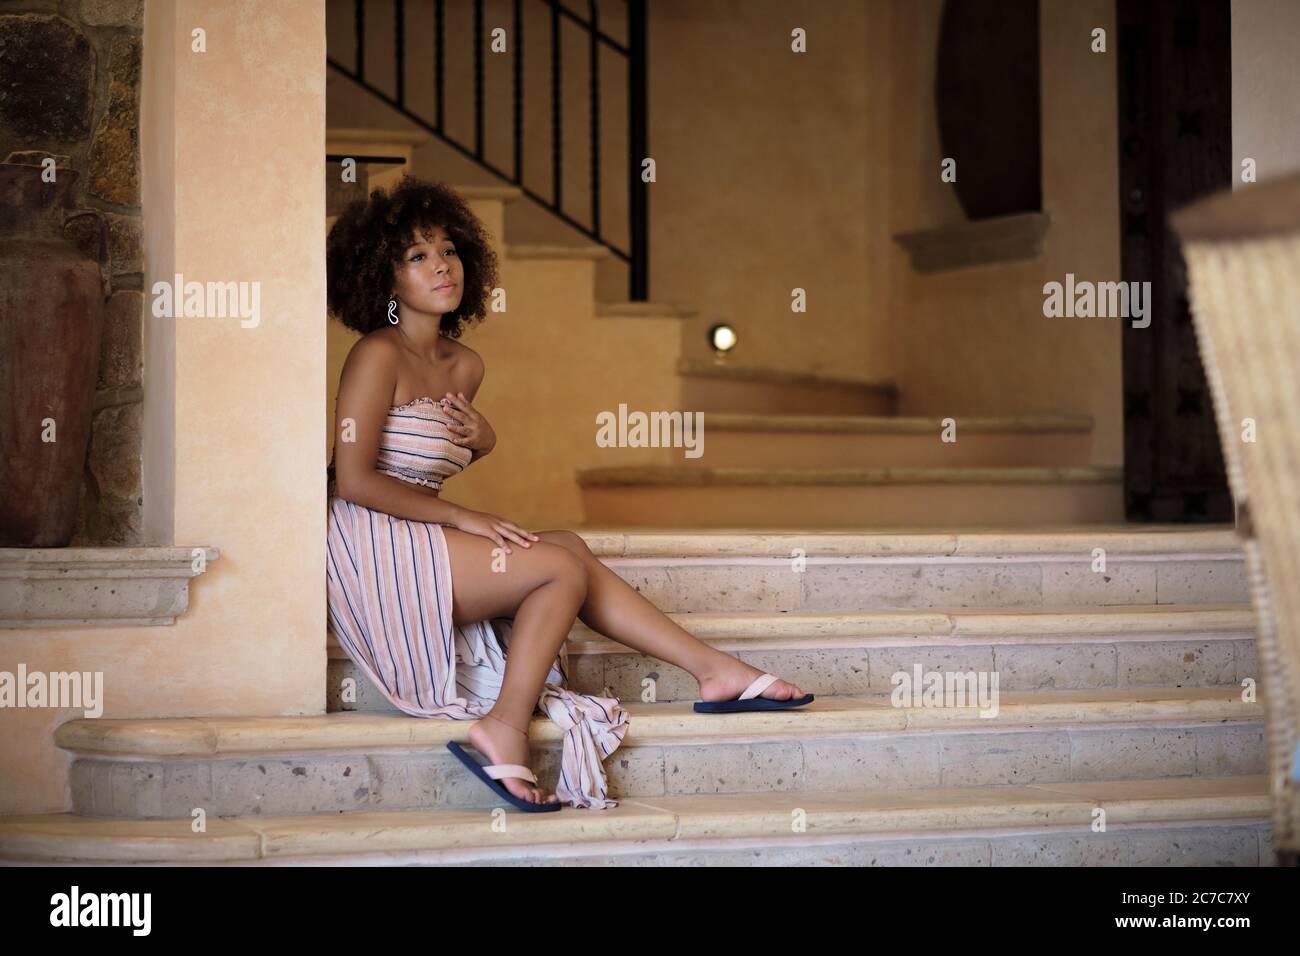 Girl of 18 years, hispanic ethnicity, sitting on stairs - Young woman with afro look hair Stock Photo